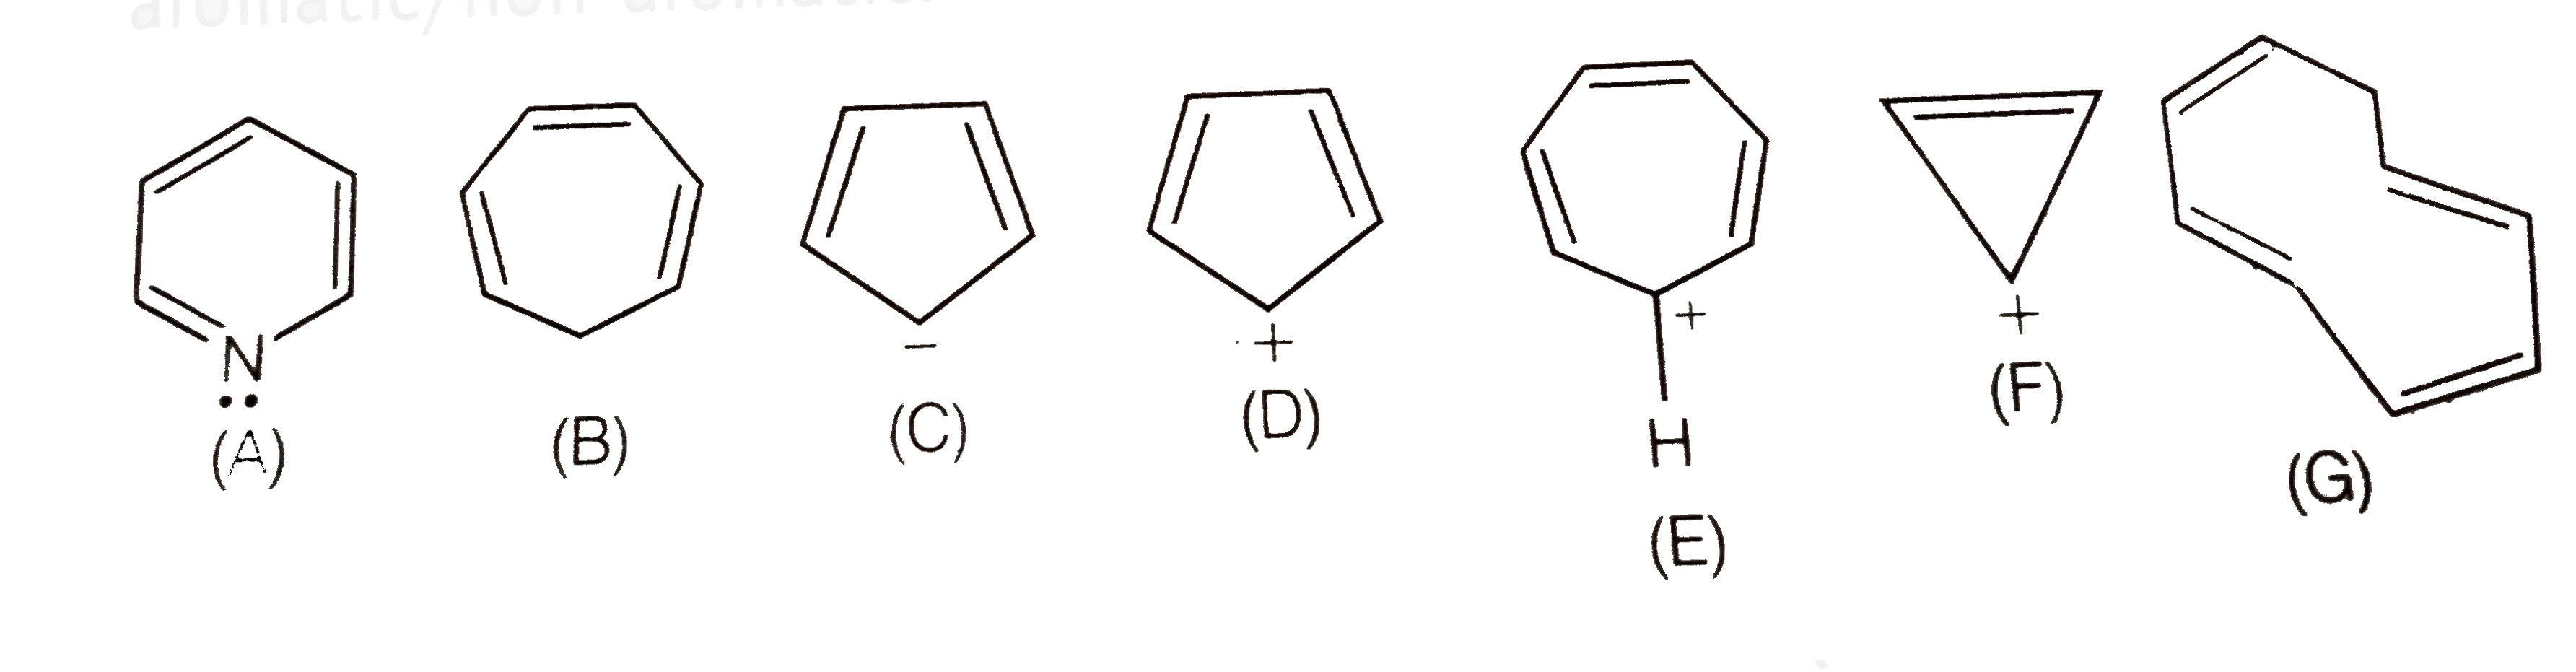 The ring systems having following characteristics are aromatic.   (i) Planar ring containing conjugated pi bonds .   (ii) Complete delocalisation of the pi -electron in ring system i.e. , each atom in the ring has unhybridised p-orbital , and   (iii) Presence of (4n+2)pi-electrons in the ring where n is an integer(n = 0, 1, 2, .......) [Huckel rule].  Using this  information classify the following compounds as aromatic/non-aromatic.